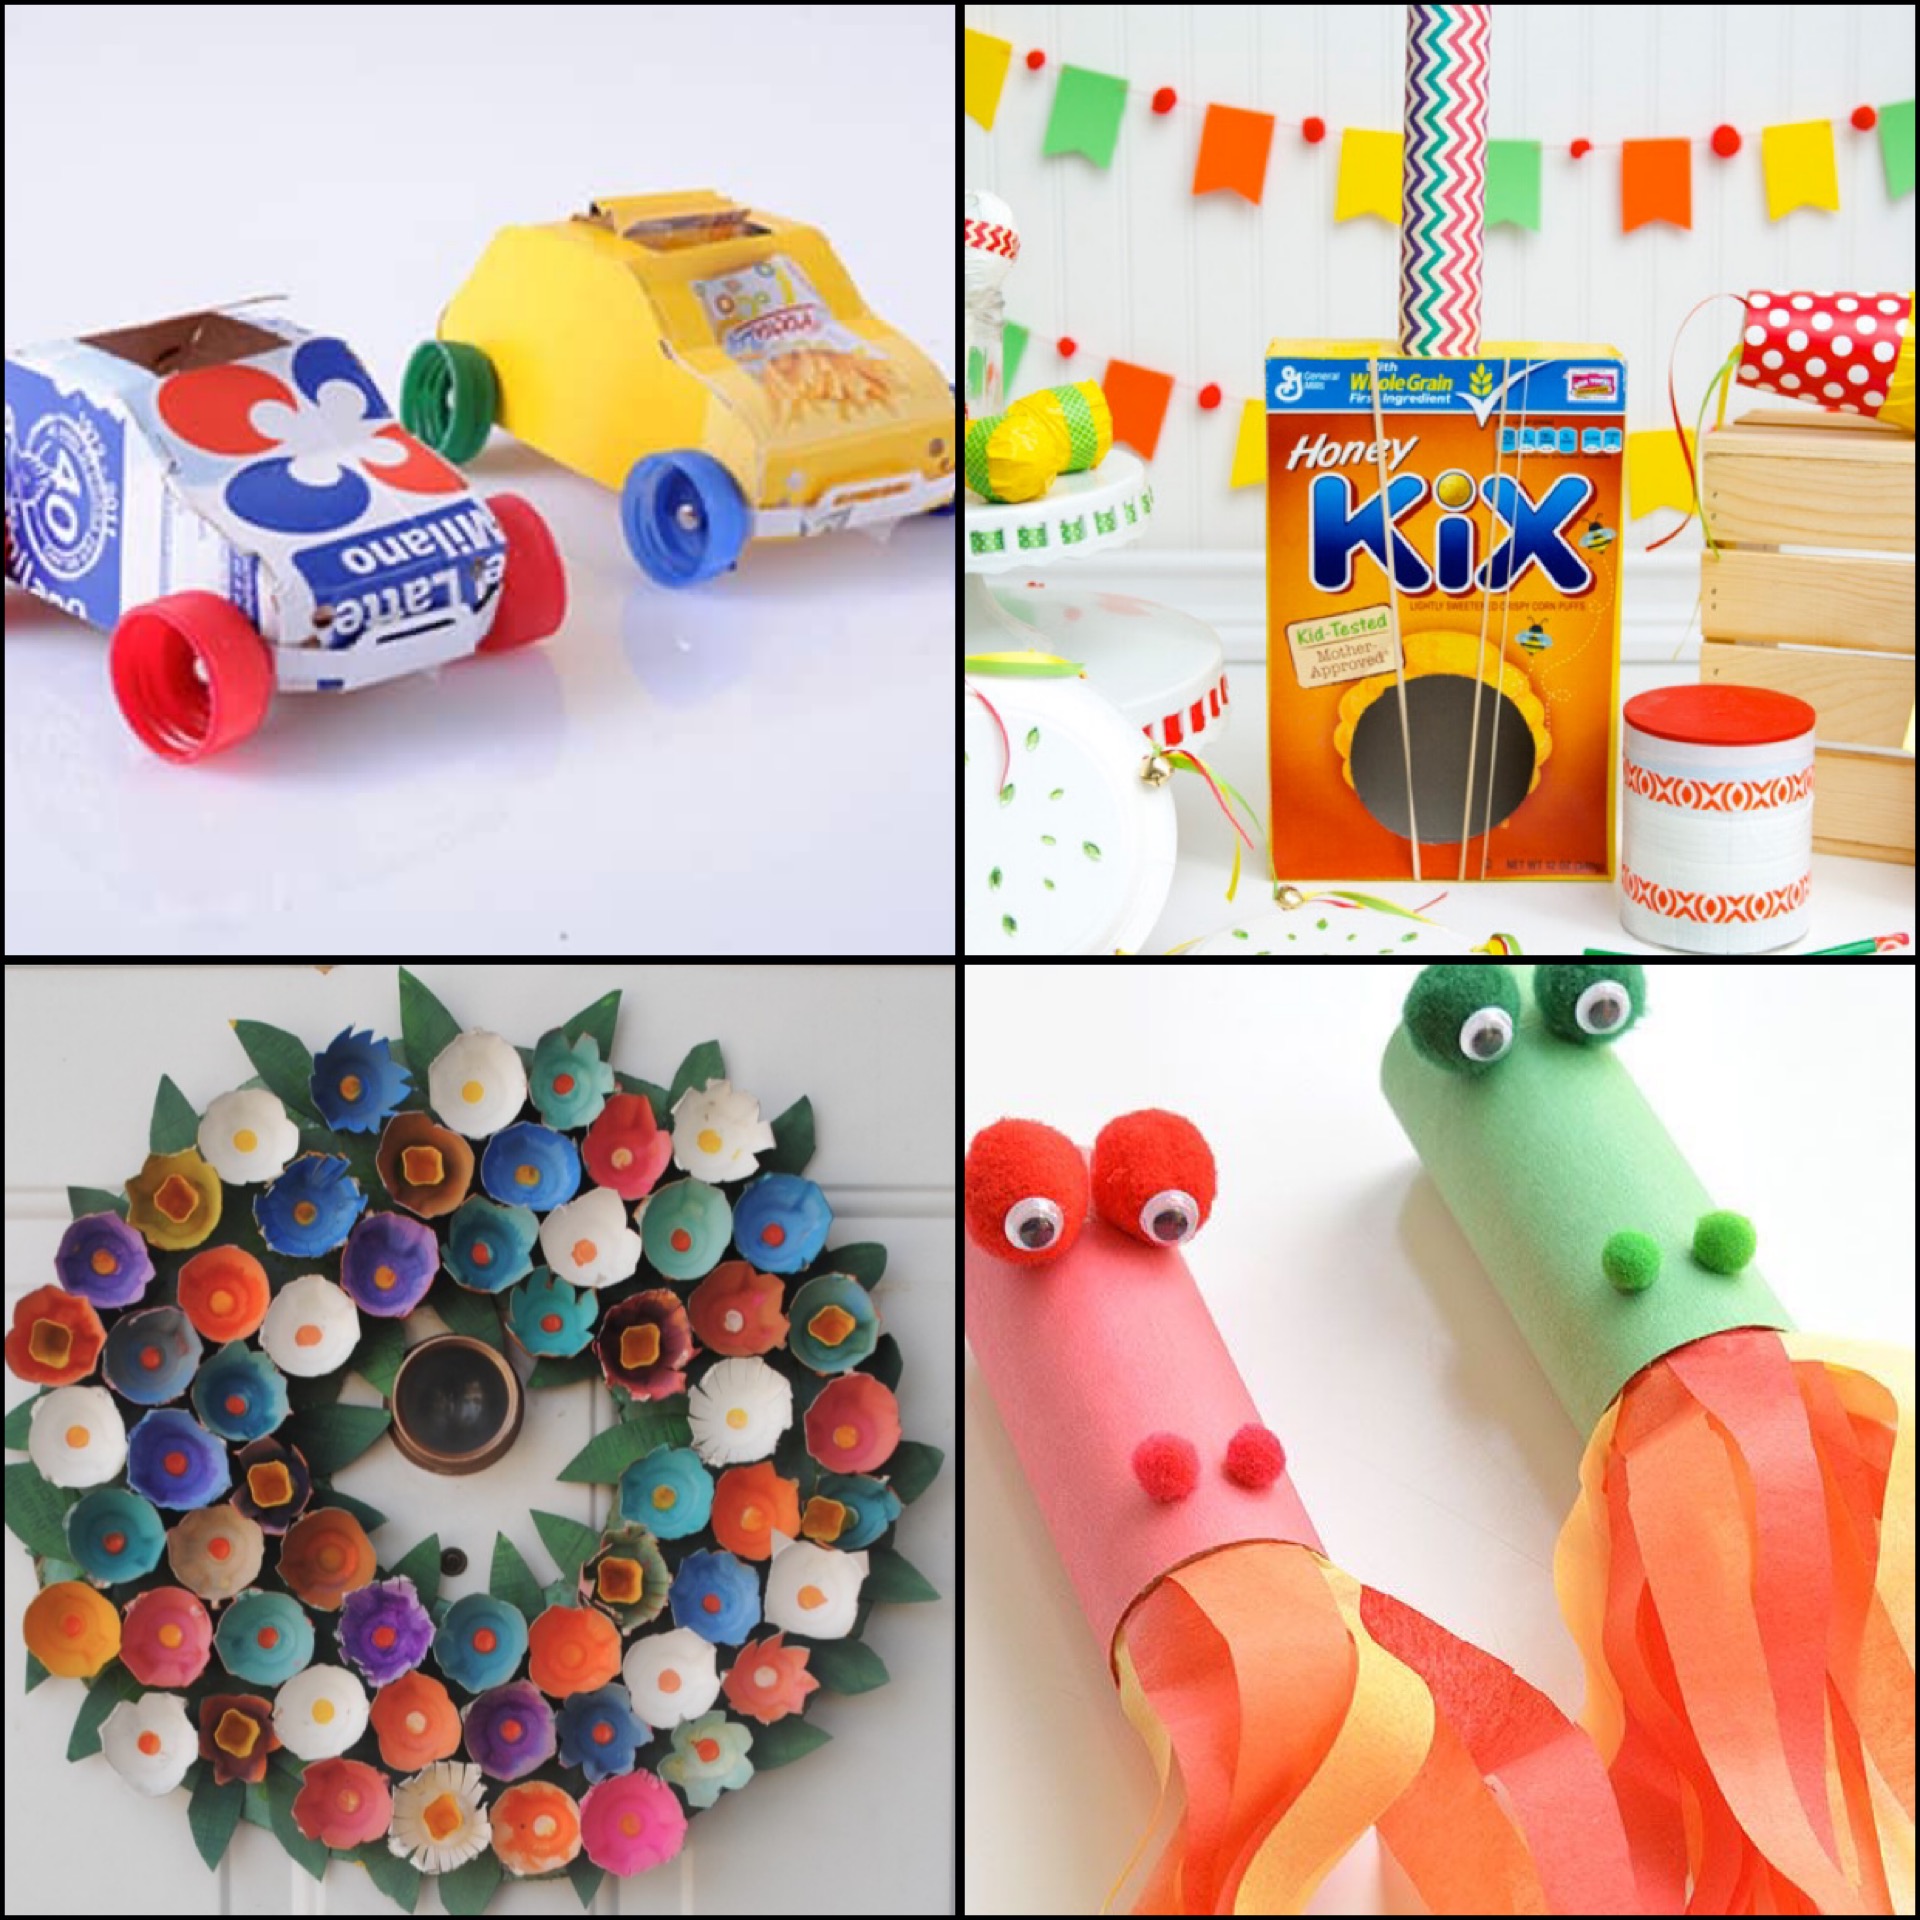 DIY Crafts From Recyclables!